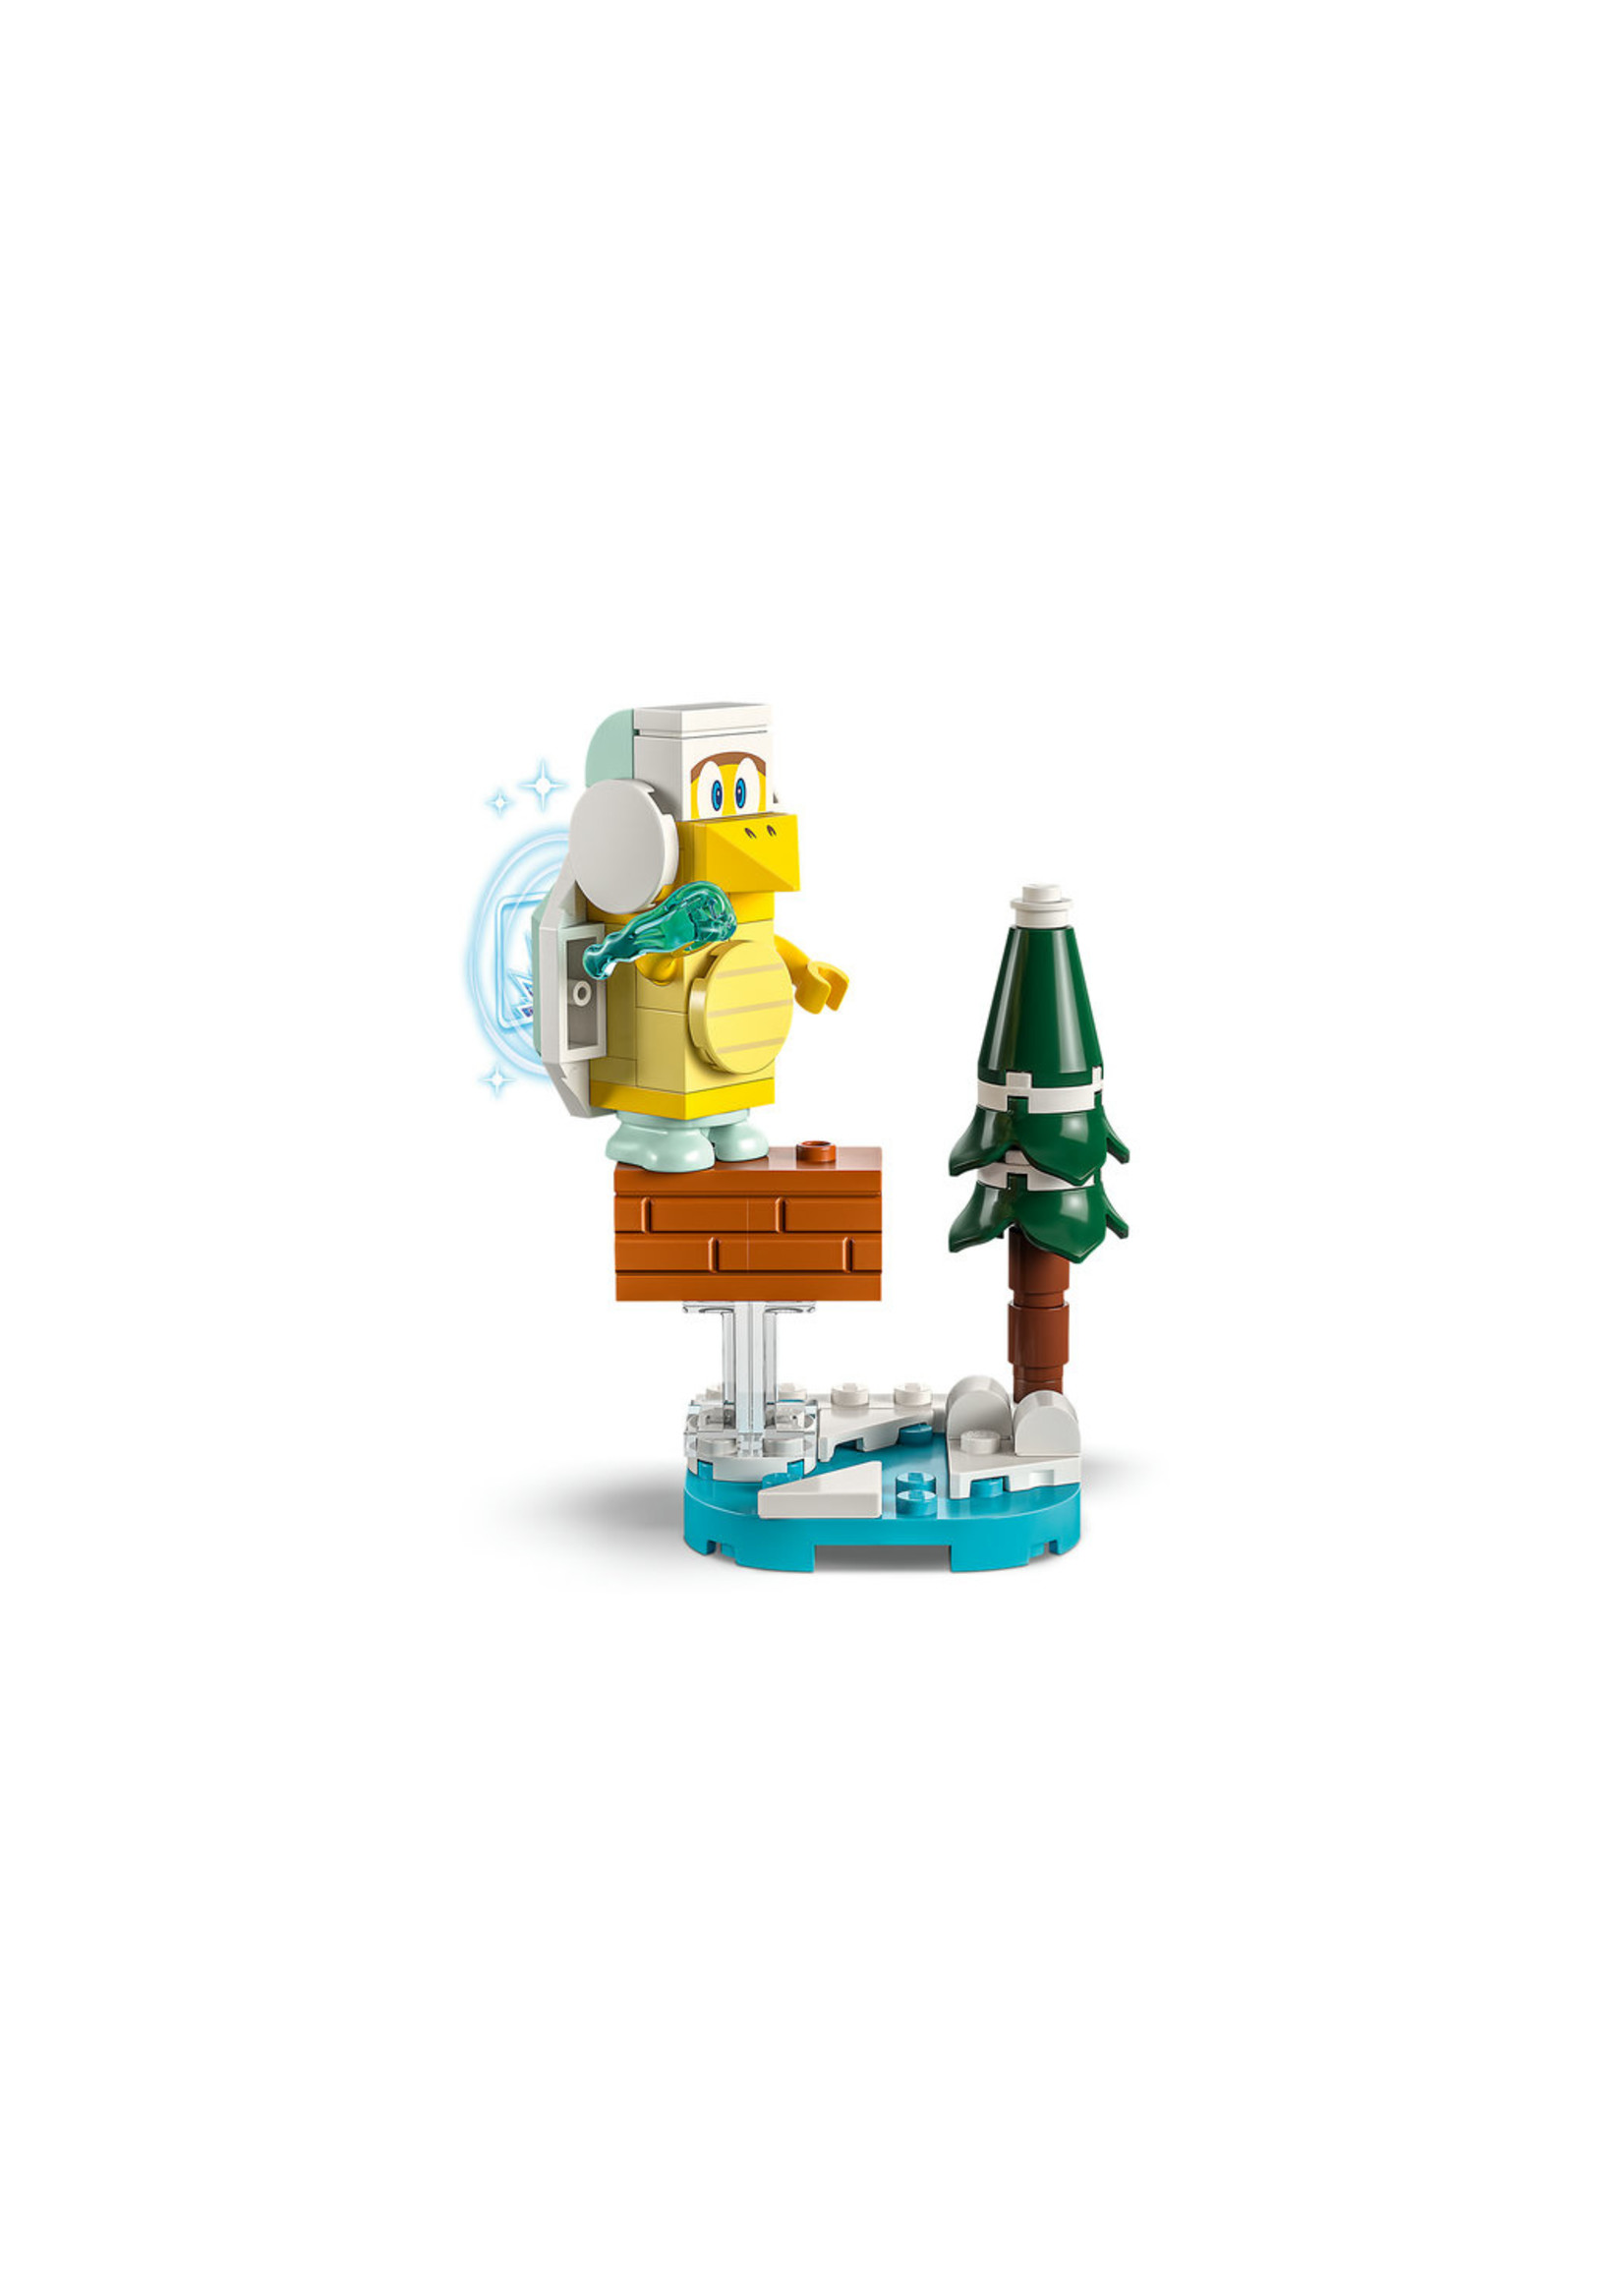 Lego 71413 - Super Mario Character Pack - Series 6